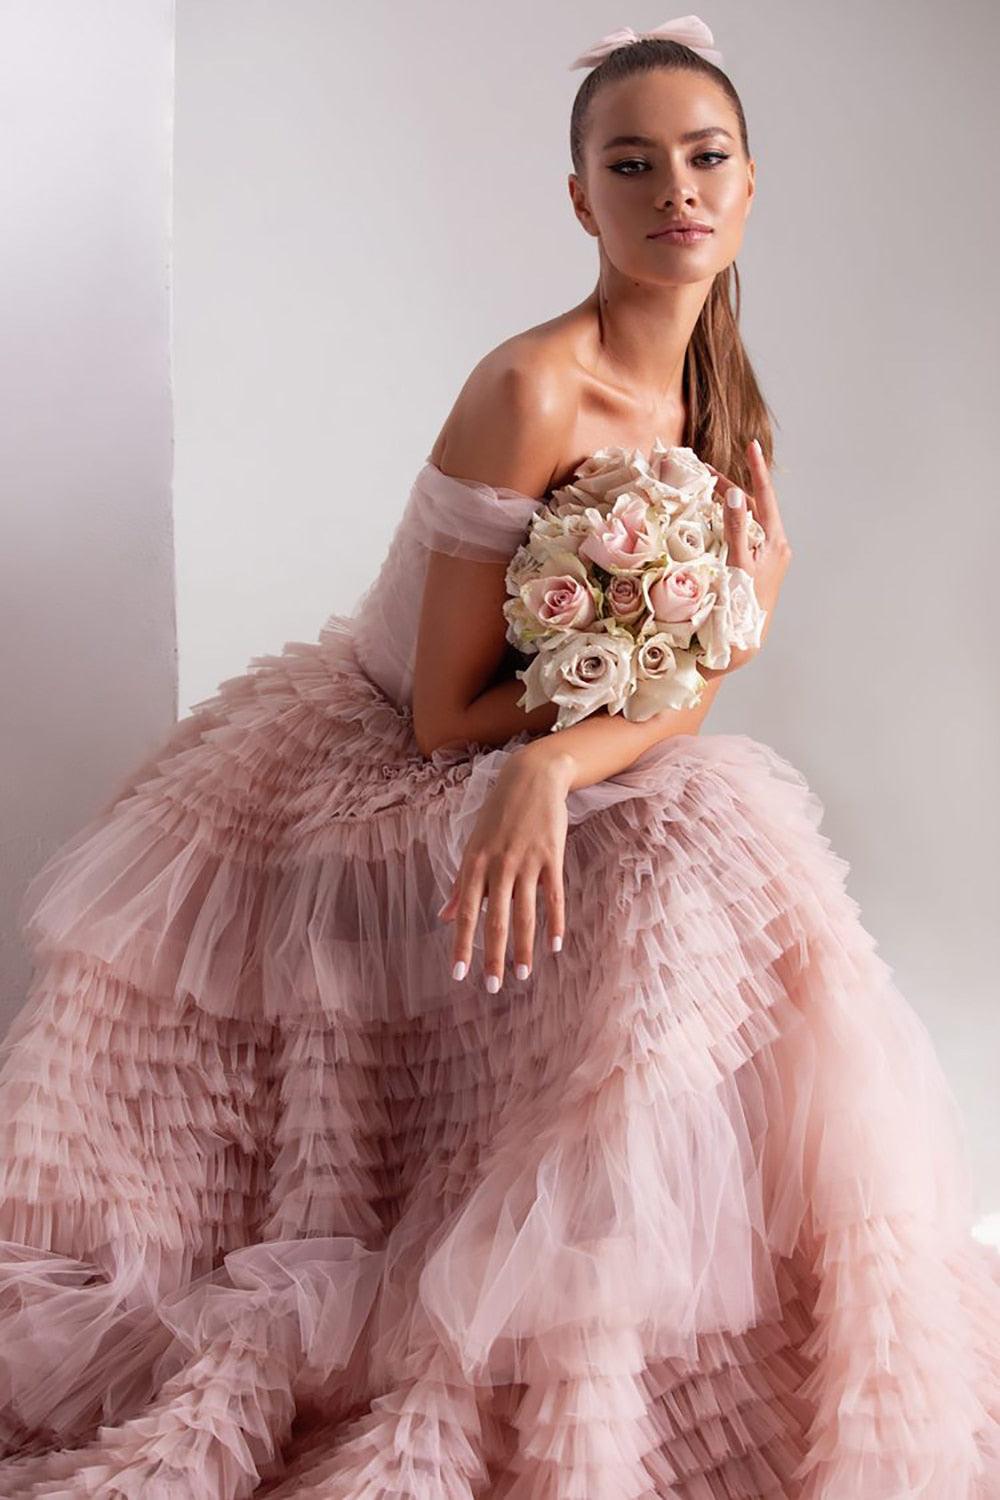 Anastasia Tiered Ruffles Gown from The House of CO-KY - Gowns